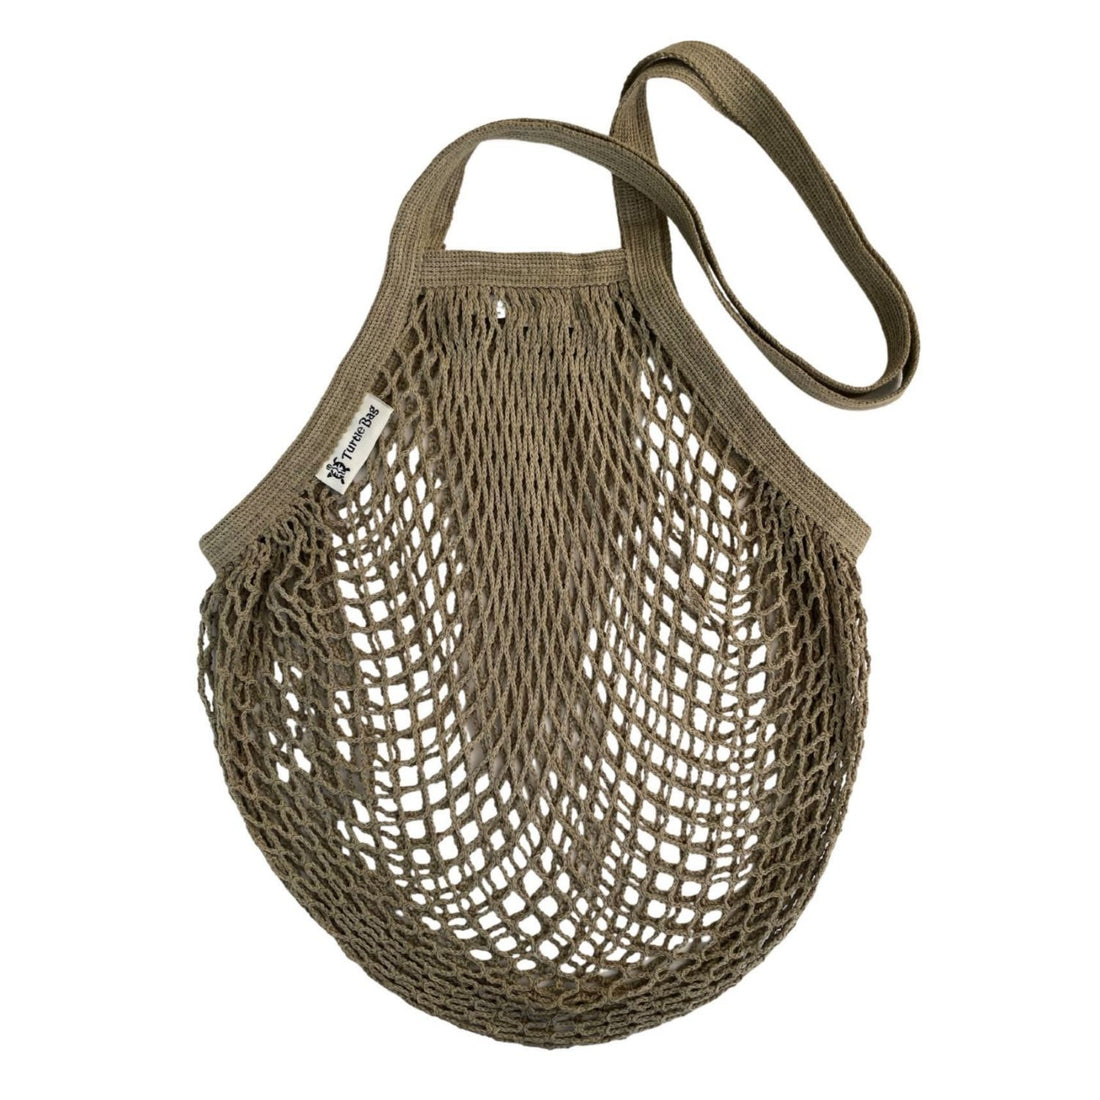 Long Handled String Bag - by Turtle Bags